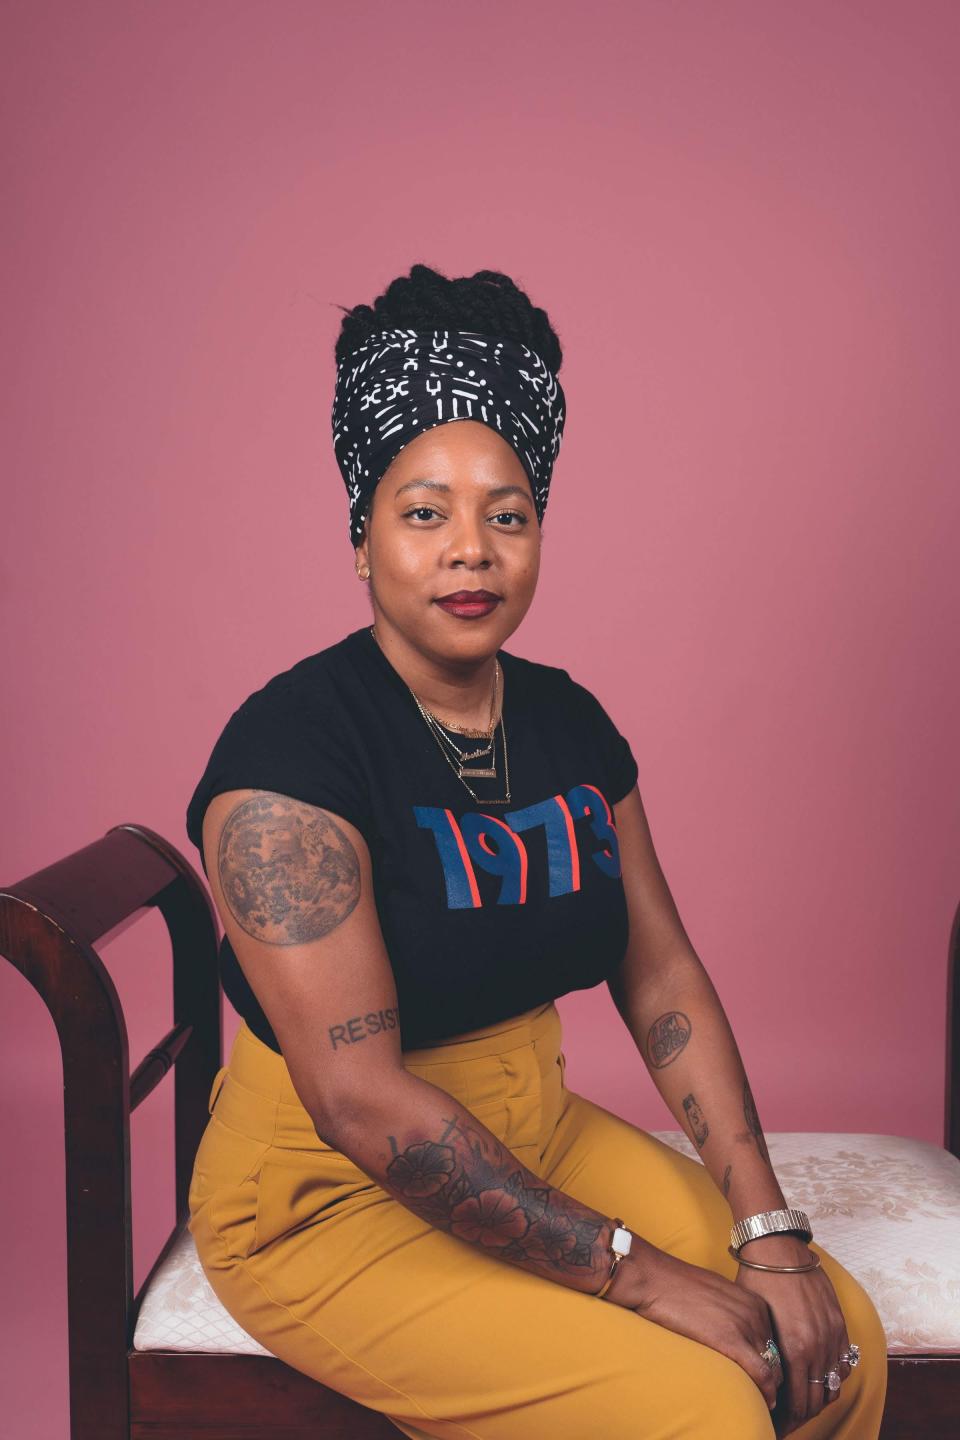 Kwajelyn Jackson is the Executive Director at Feminist Women’s Health Center, the only non-profit, locally-based organization in Georgia providing abortion care, while also protecting reproductive rights and promoting reproductive justice through organizing and advocacy.